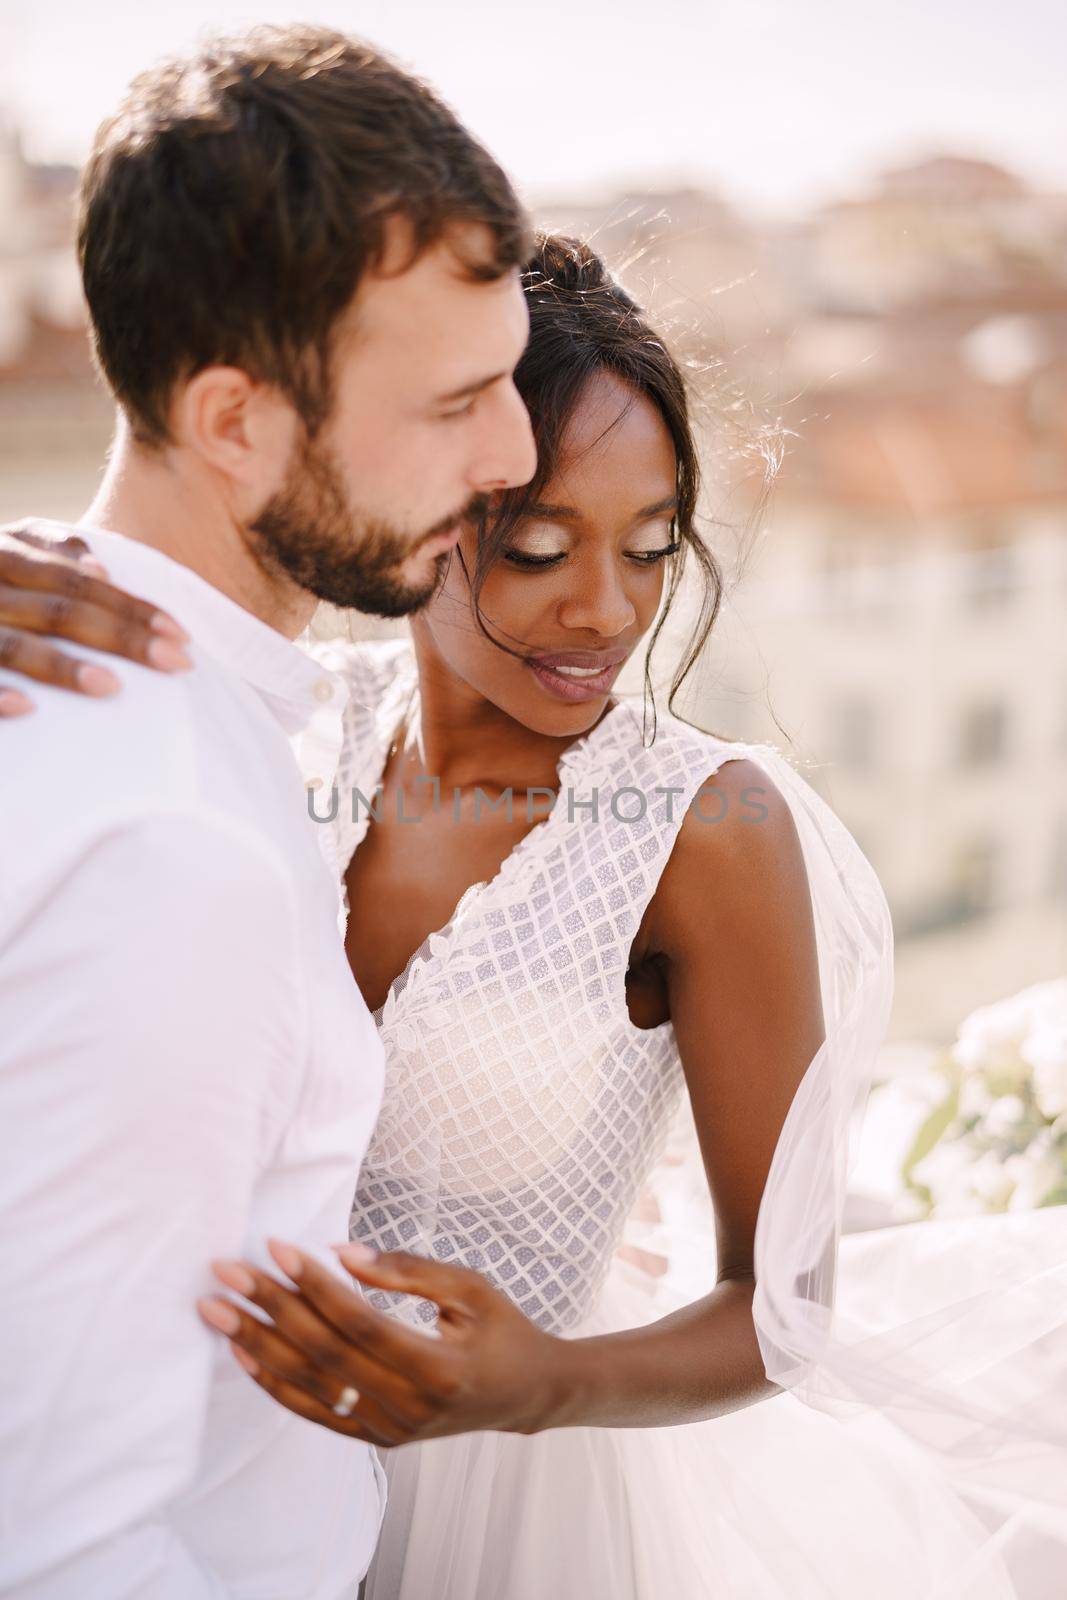 Interracial wedding couple. Destination fine-art wedding in Florence, Italy. Caucasian groom and African-American bride cuddle on the roof, in the sunny sunset light.